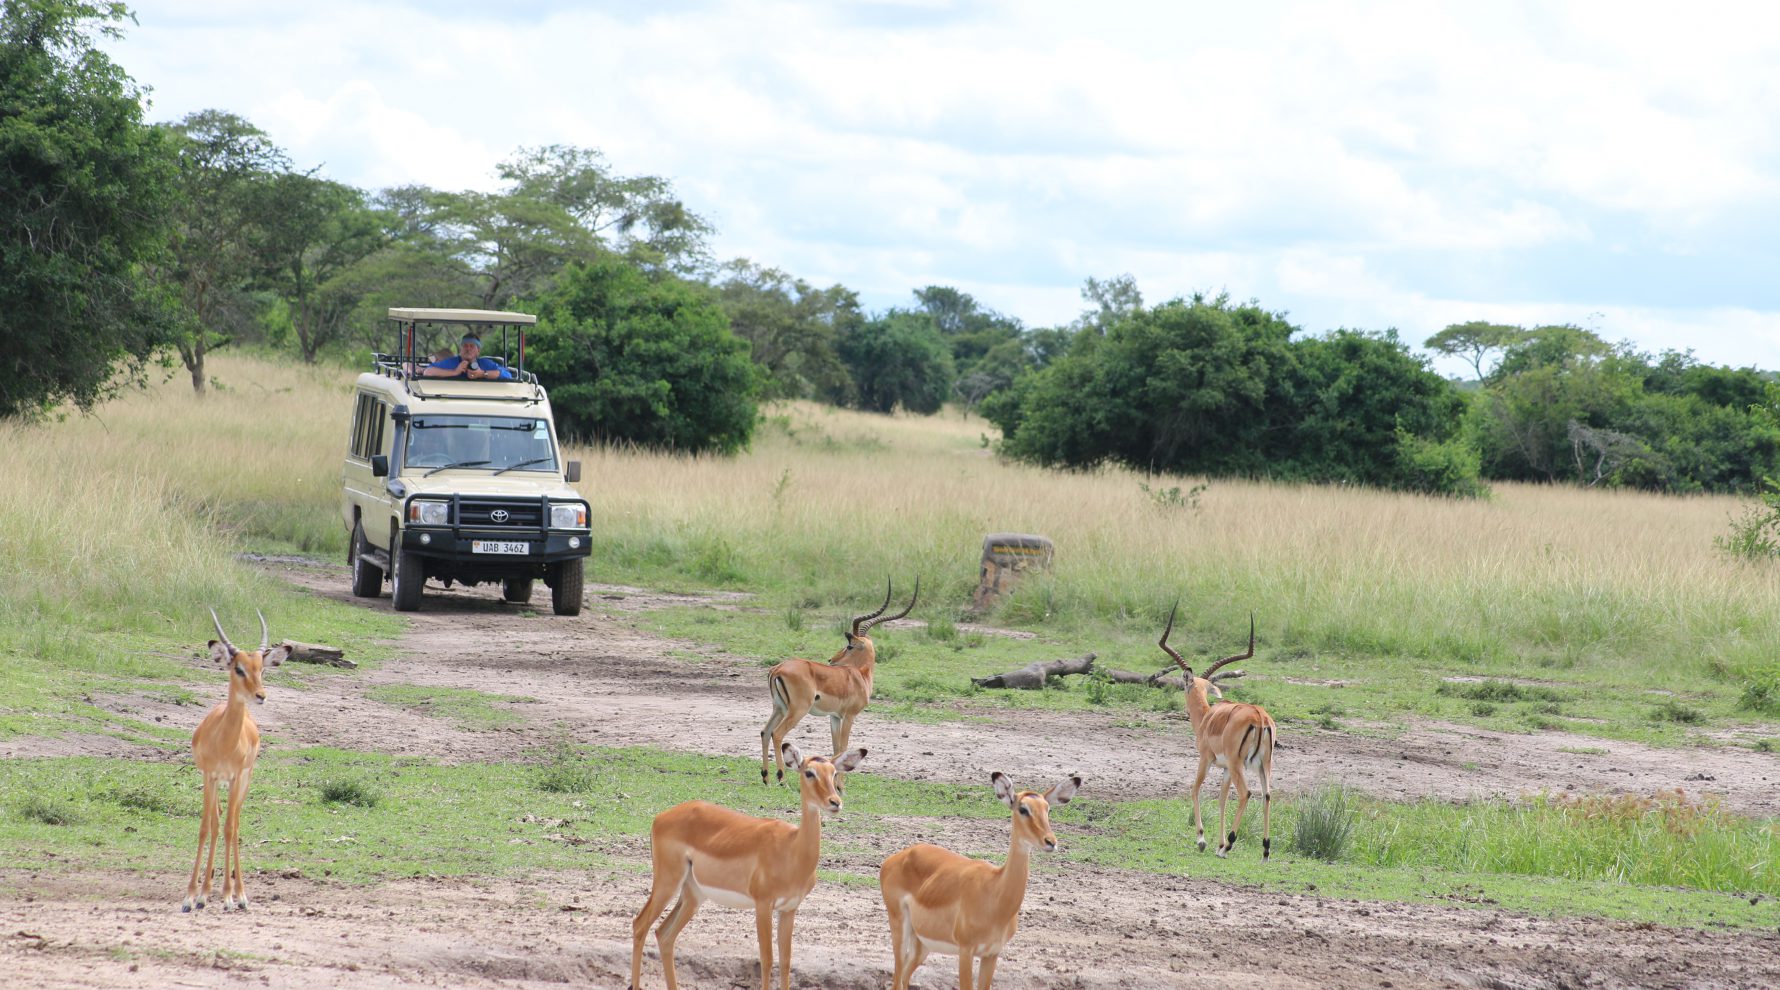 Adventures in Lake Mburo National Park  located in the western region of Uganda designated as a UNESCO World Heritage Site.